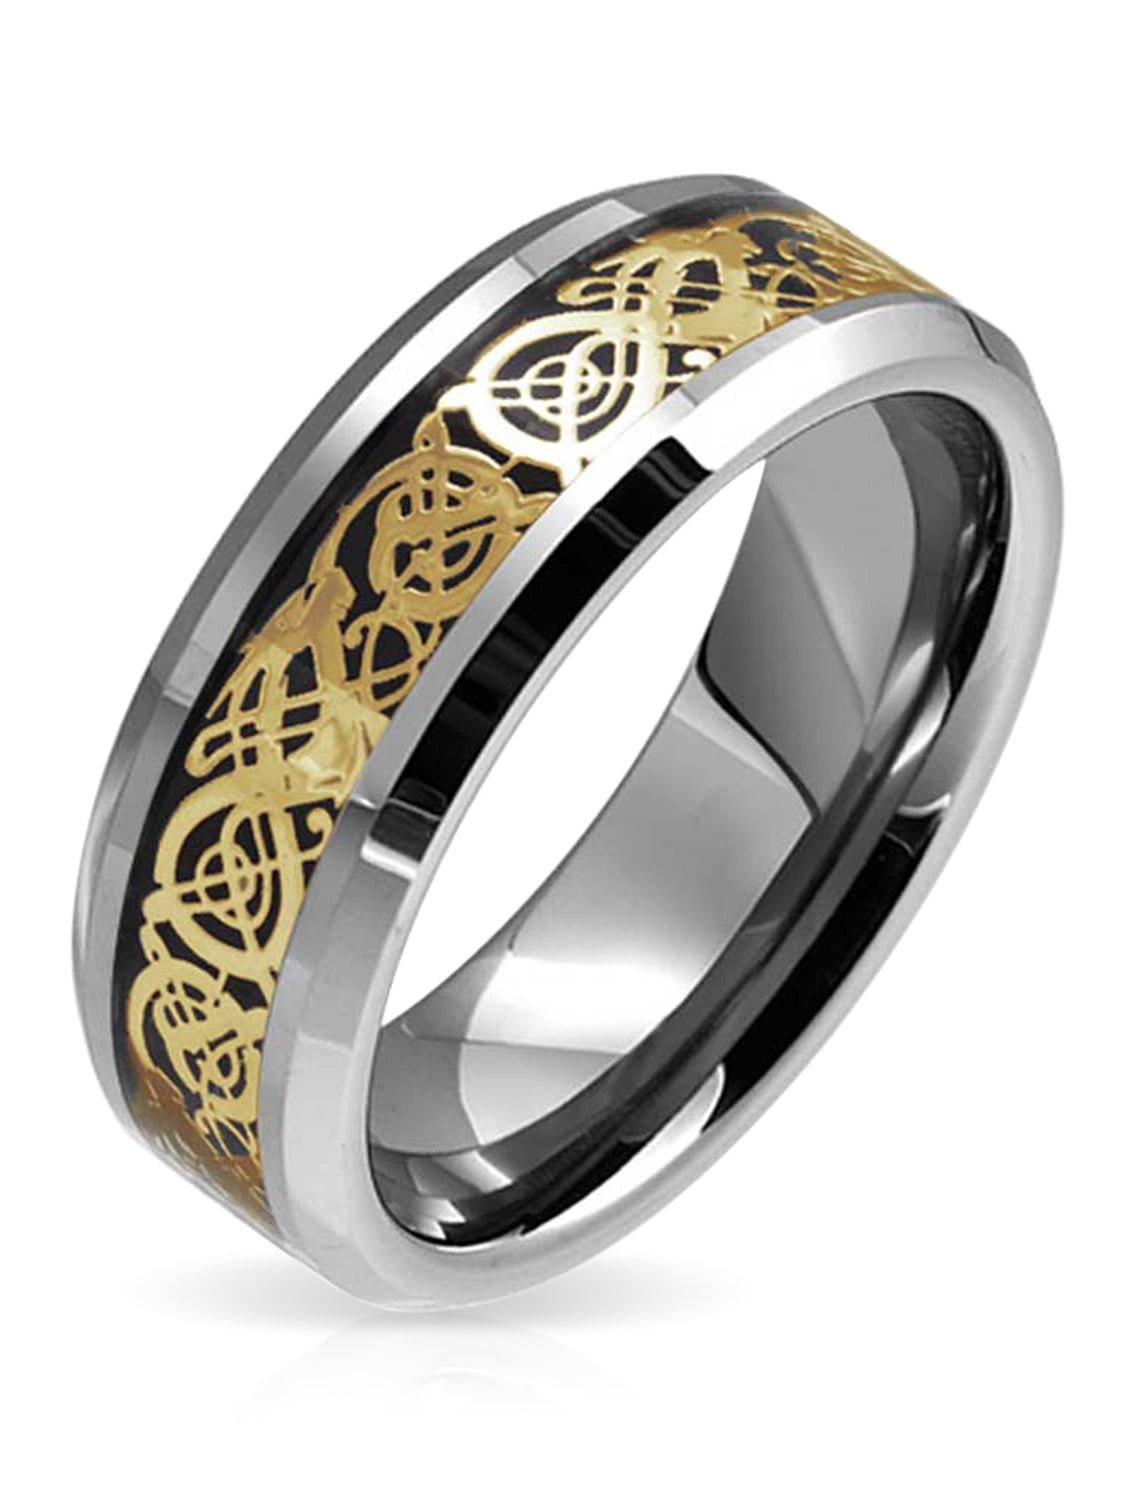 Bling Jewelry - Two Tone Celtic Knot Dragon Inlay Couples Titanium ...